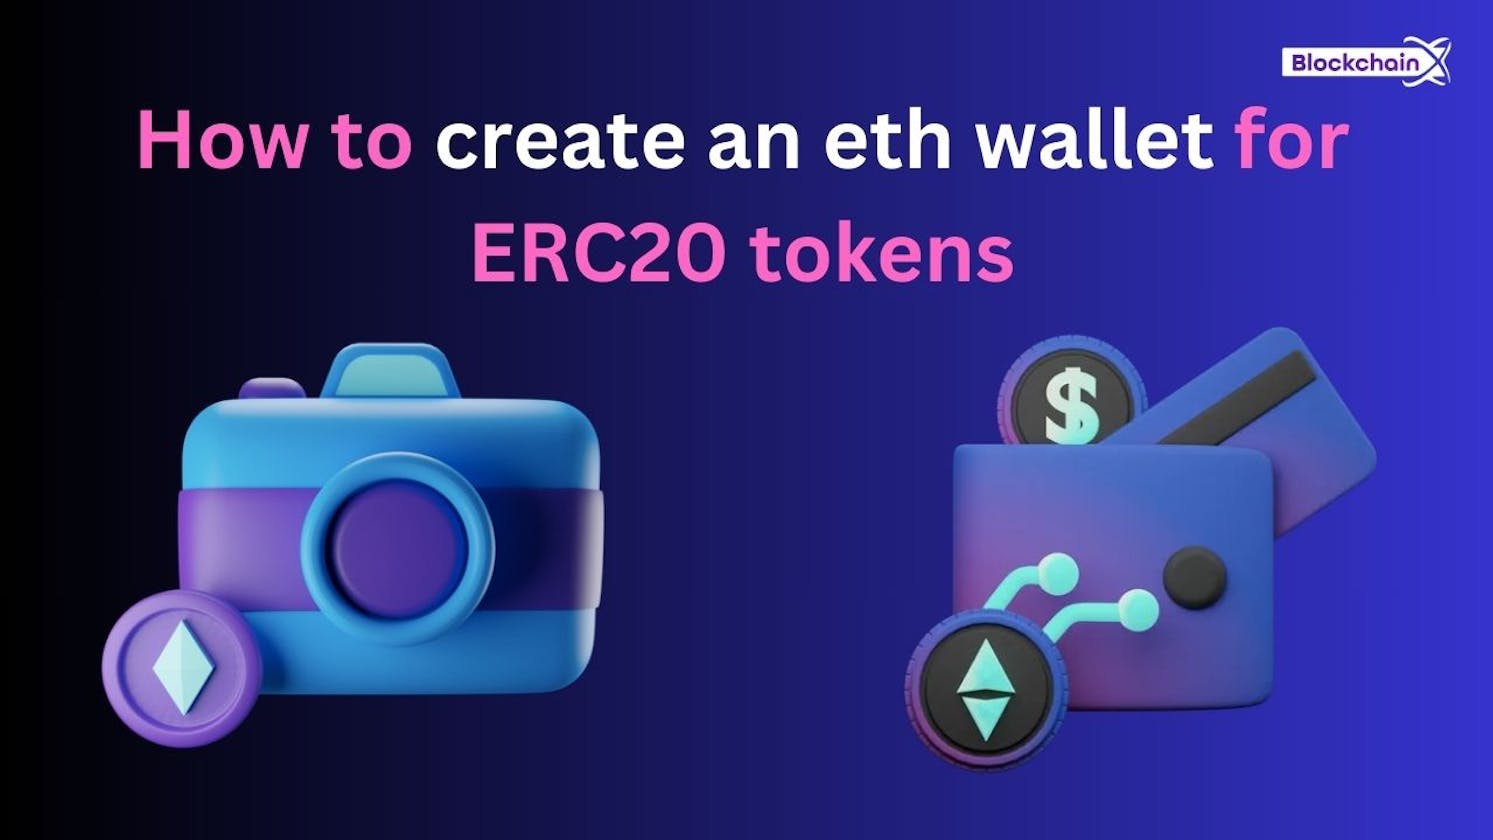 How to create an eth wallet for erc20 tokens